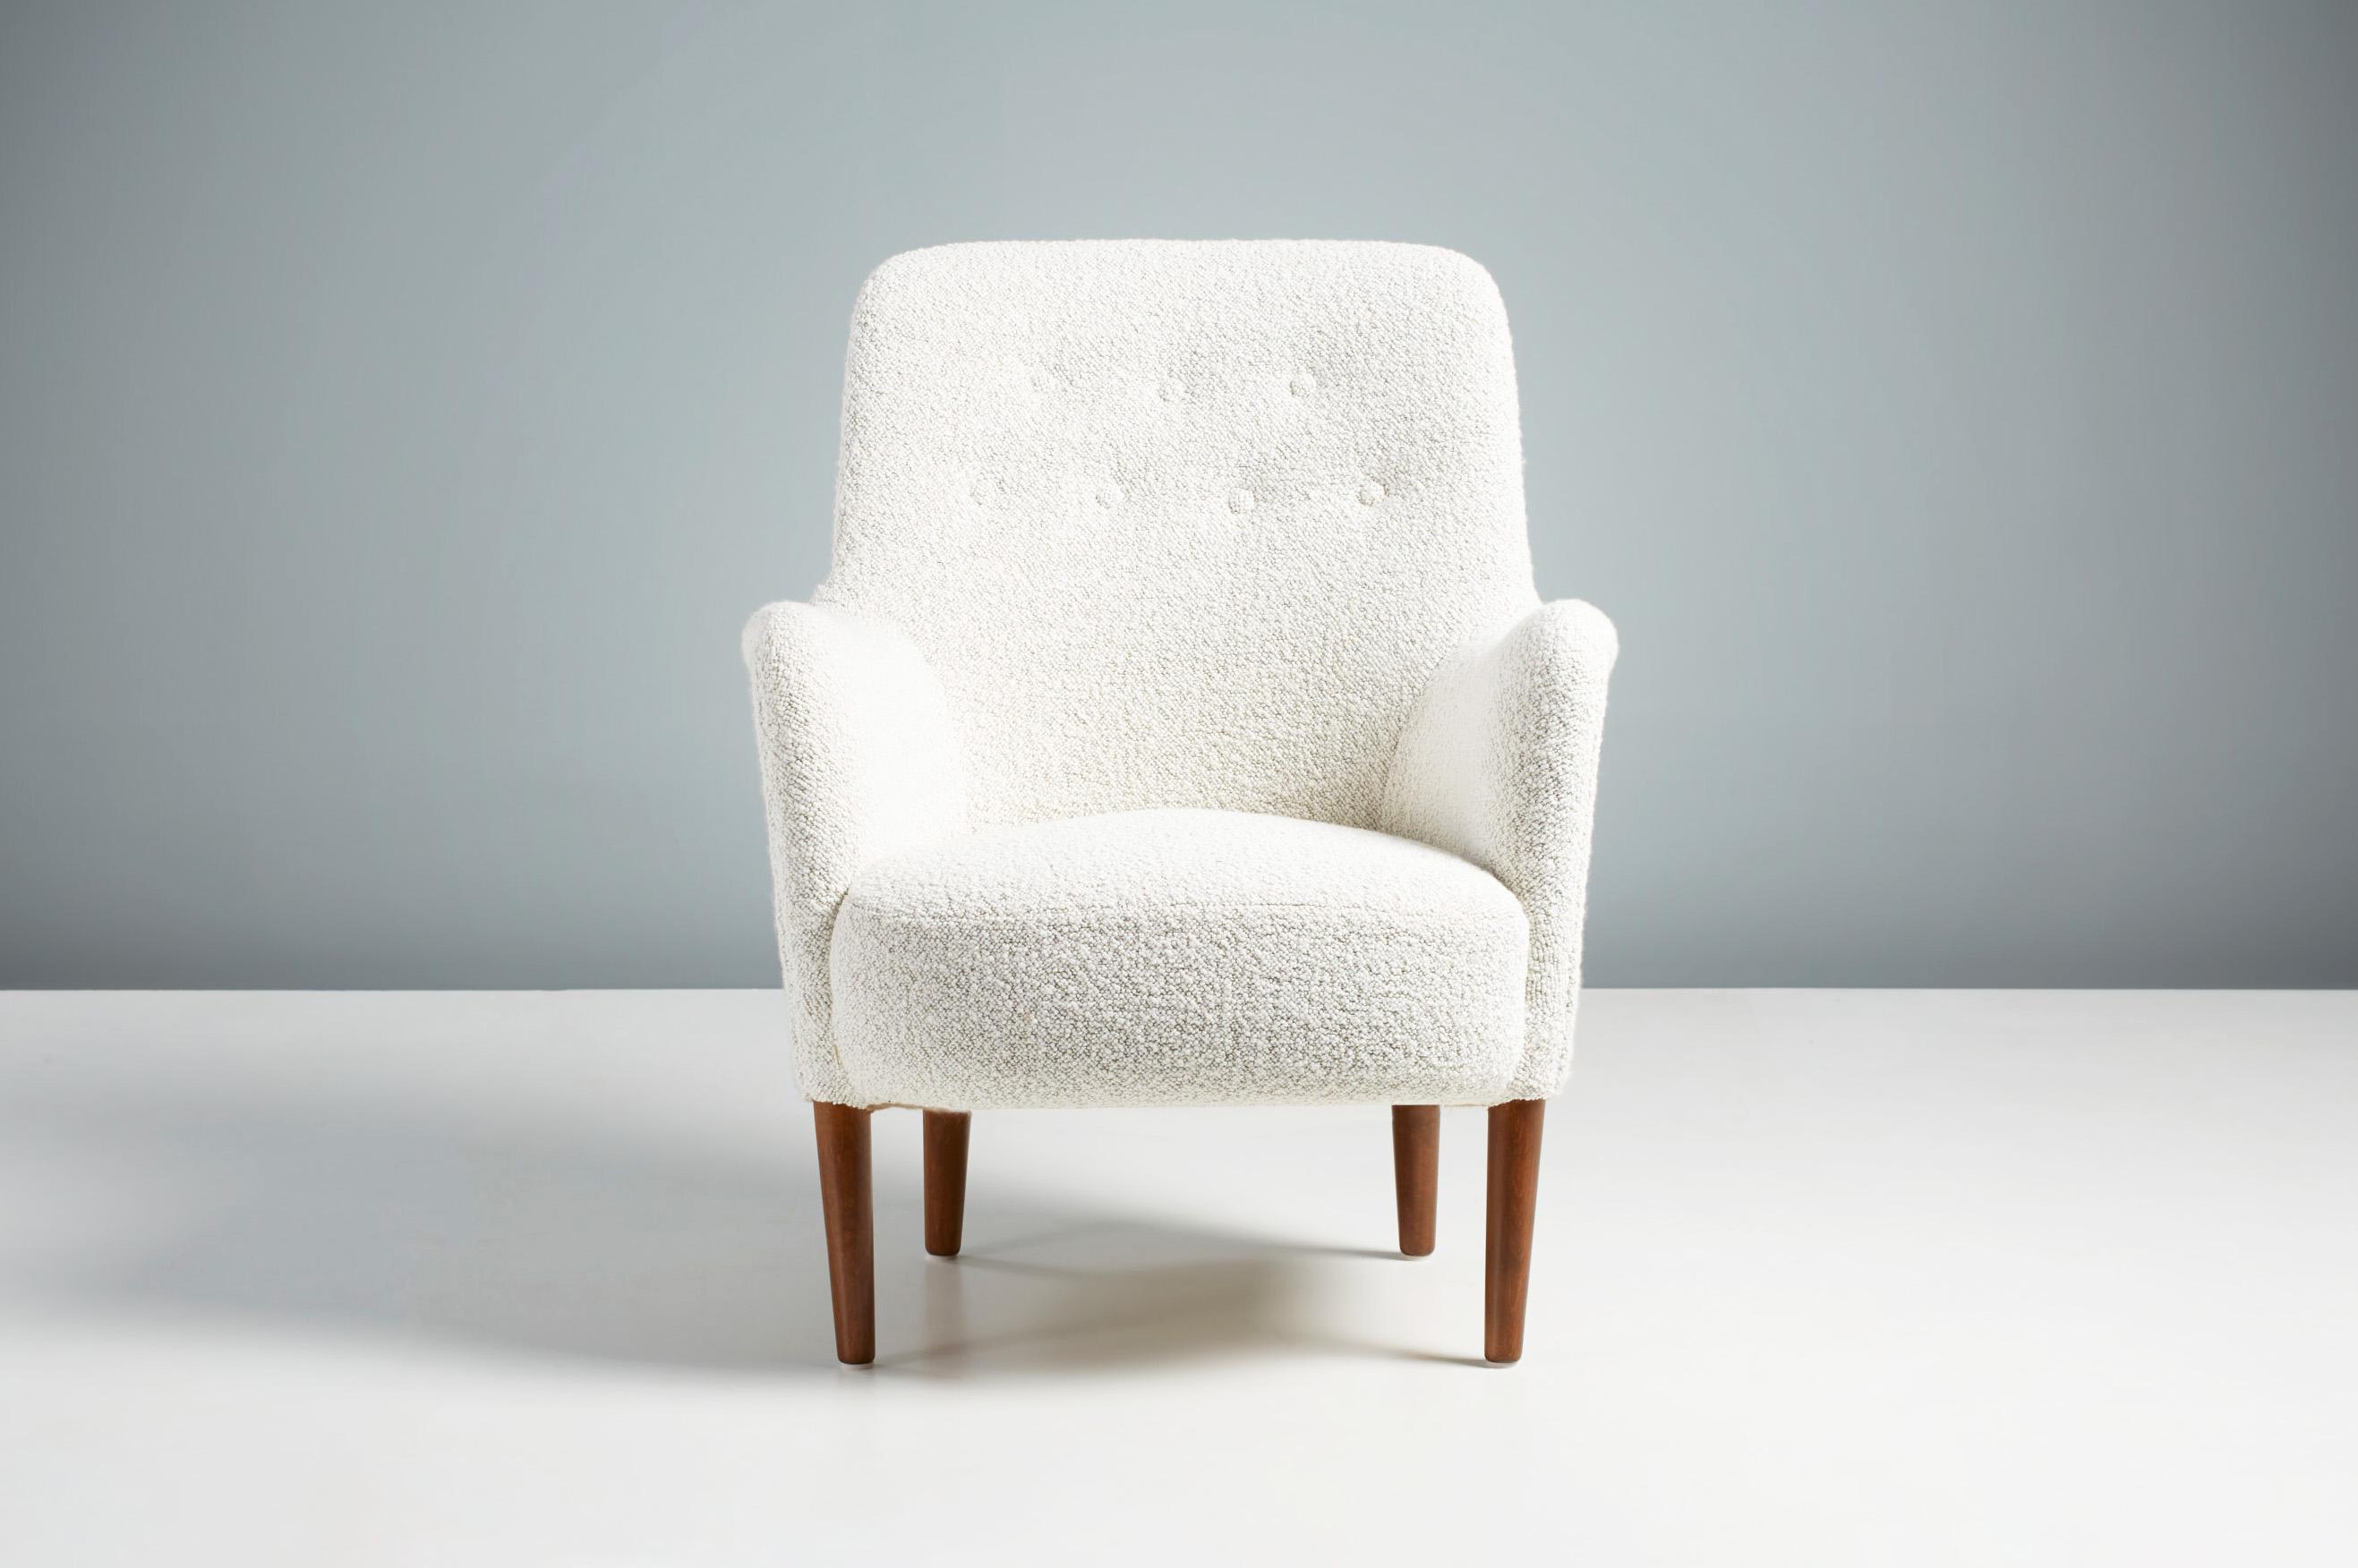 Carl Malmsten Armchair, circa 1950s.

An armchair upholstered armchairs from Swedish master: Carl Malmsten. This model is a lighter variation on the Samsas chair with taller legs. This chair has been reupholstered in Dedar Karakorum ‘Ecume’ fabric.